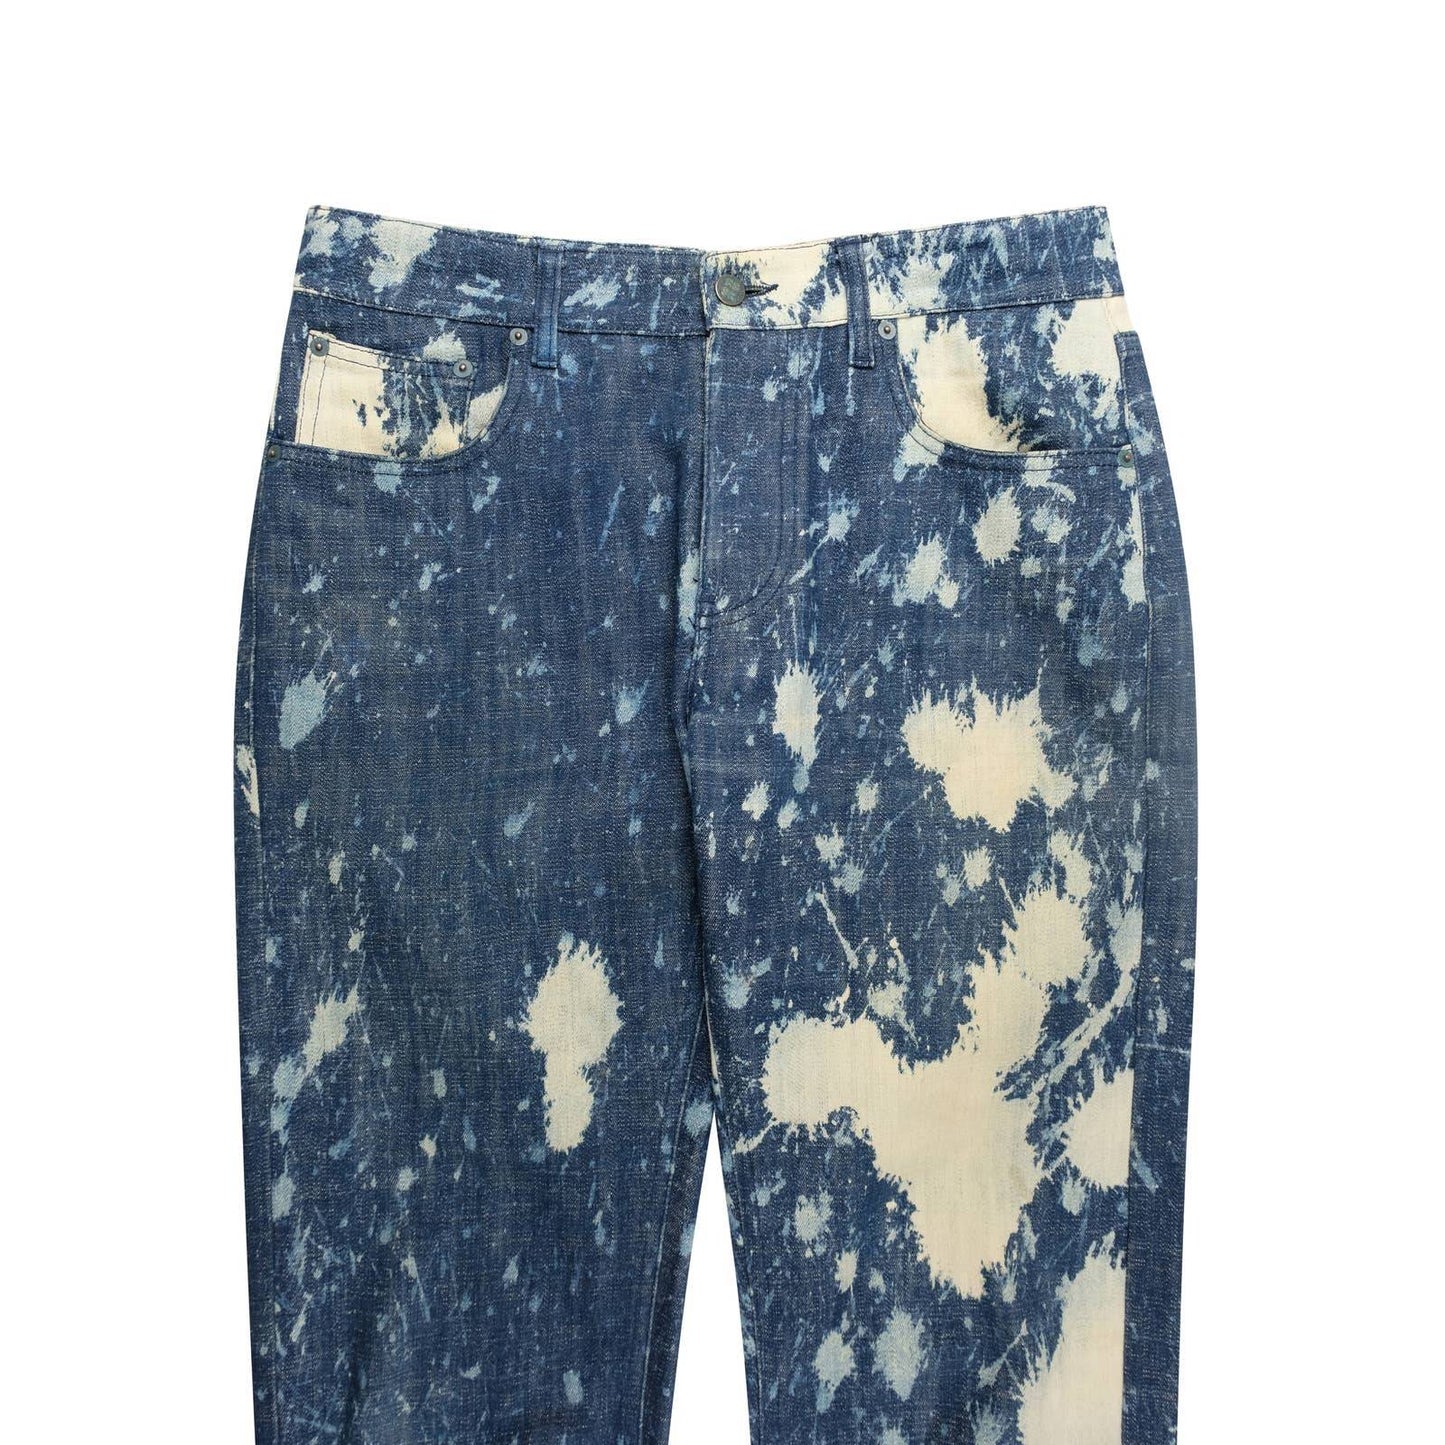 Texta Bleached Denim Jeans by Gorman Online | THE ICONIC | Australia